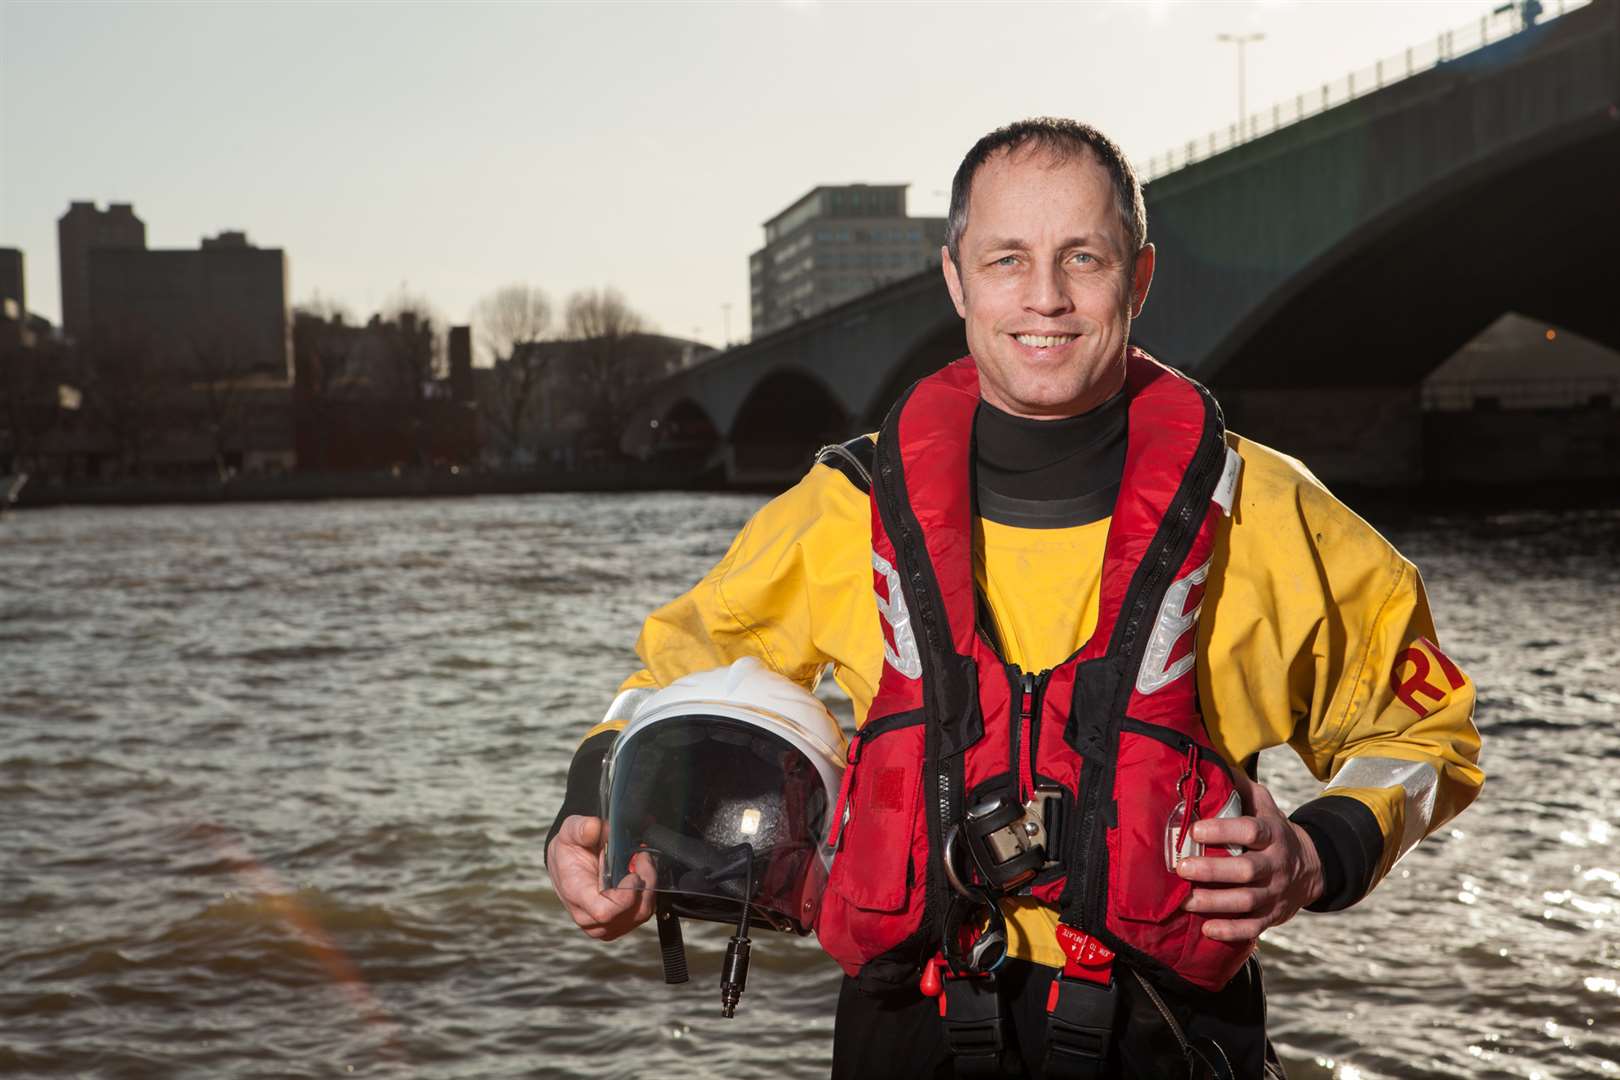 Lifeboat crewman Mick Nield on the River Thames